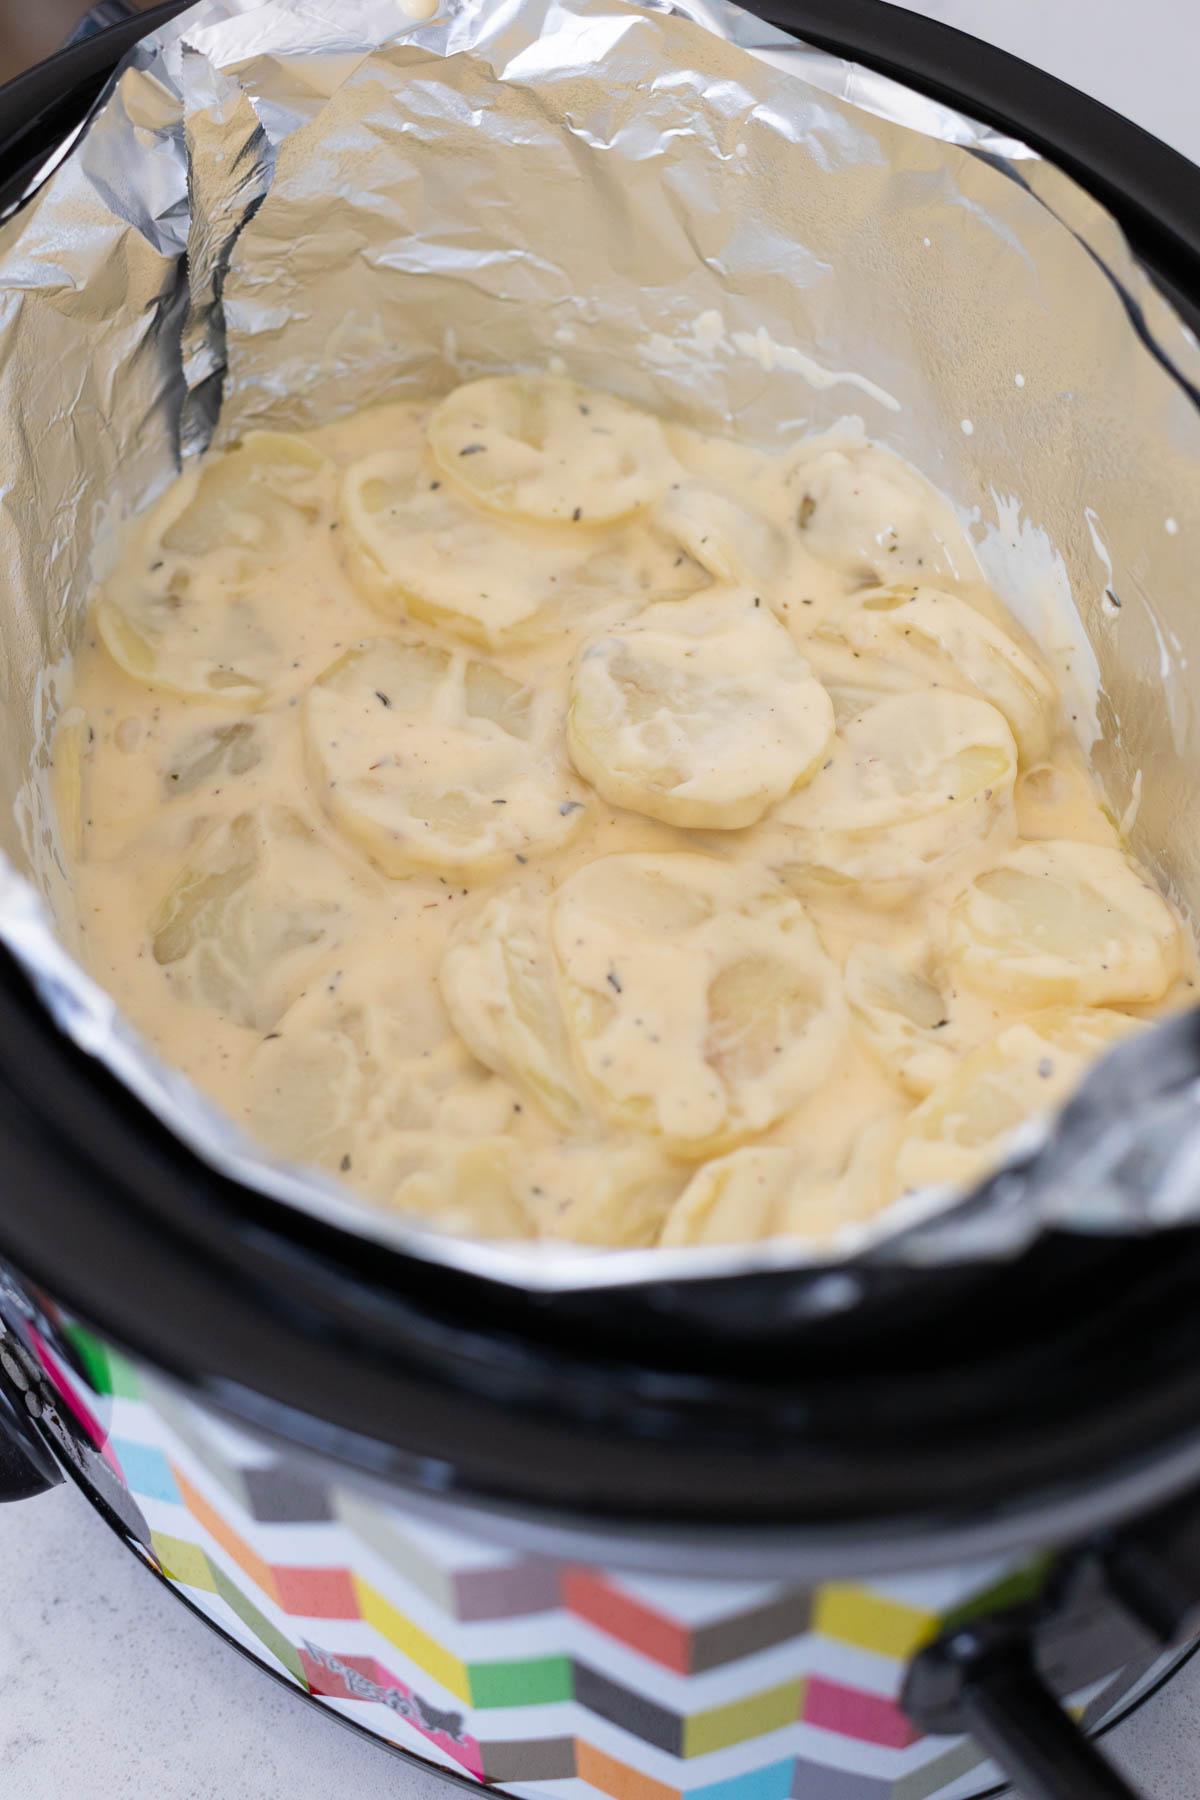 The prepared scalloped potatoes have been added to the slowcooker pot and spread into a compact layer.